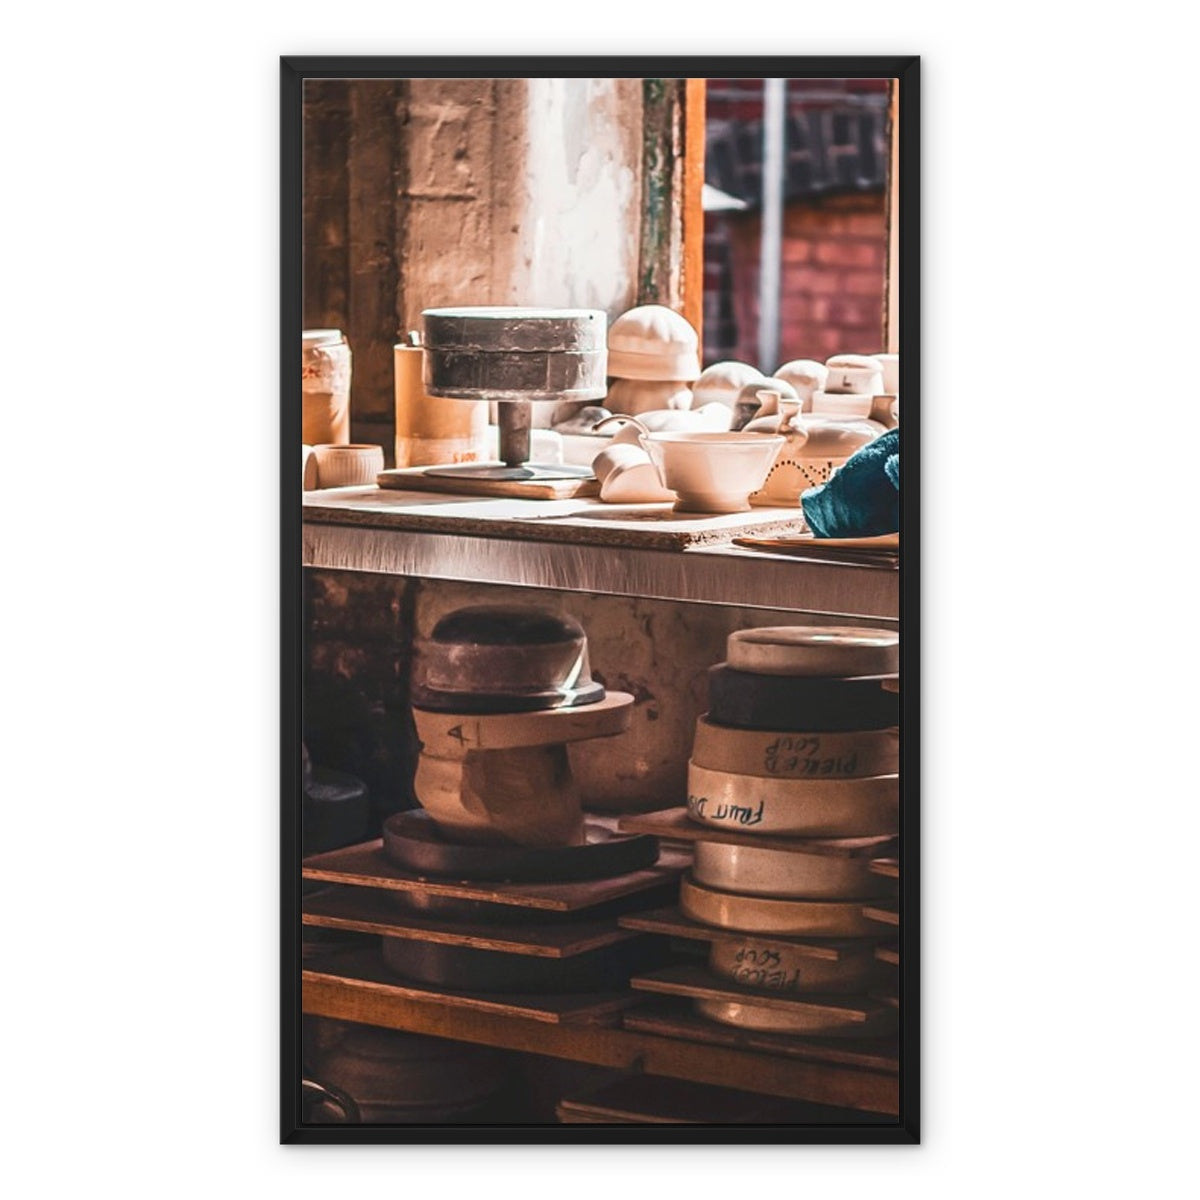 The Potter's Craft Framed Canvas